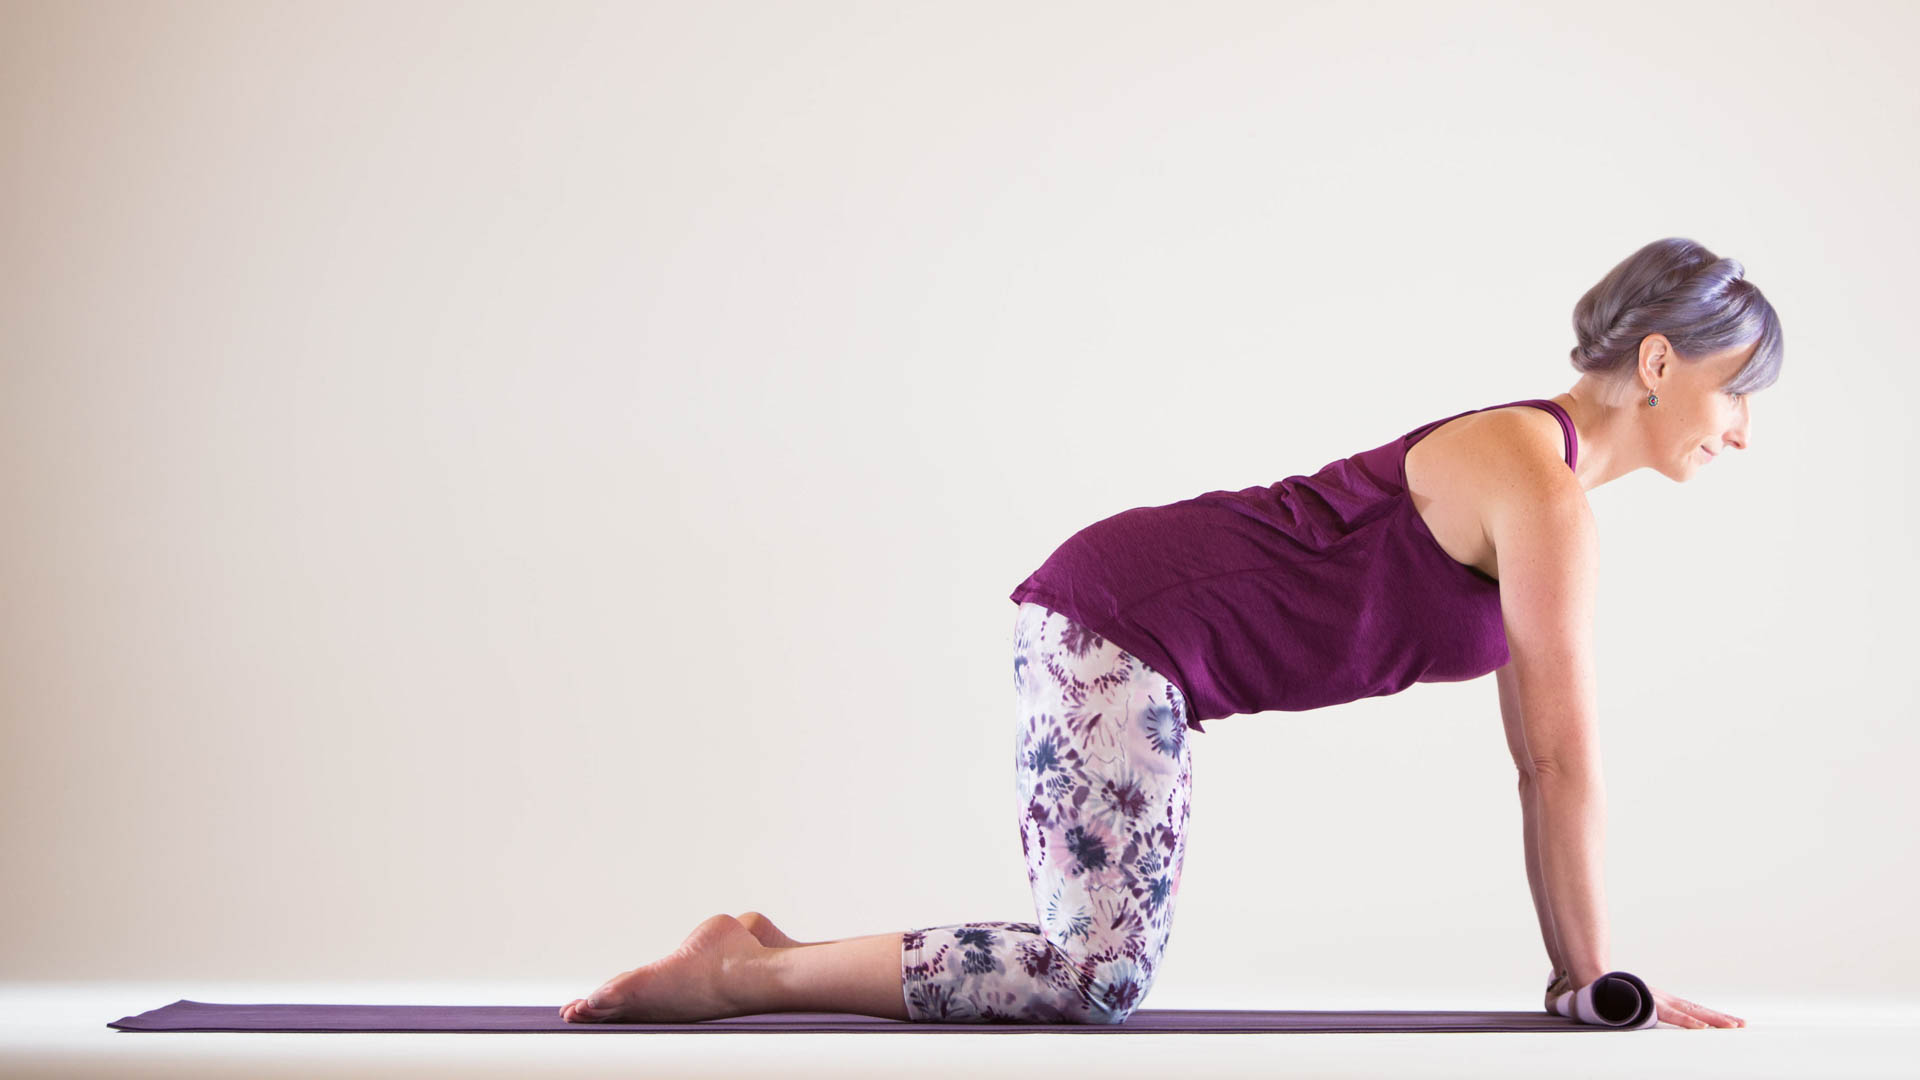 How to Modify and Prevent Wrist Injuries During Your Yoga Practice